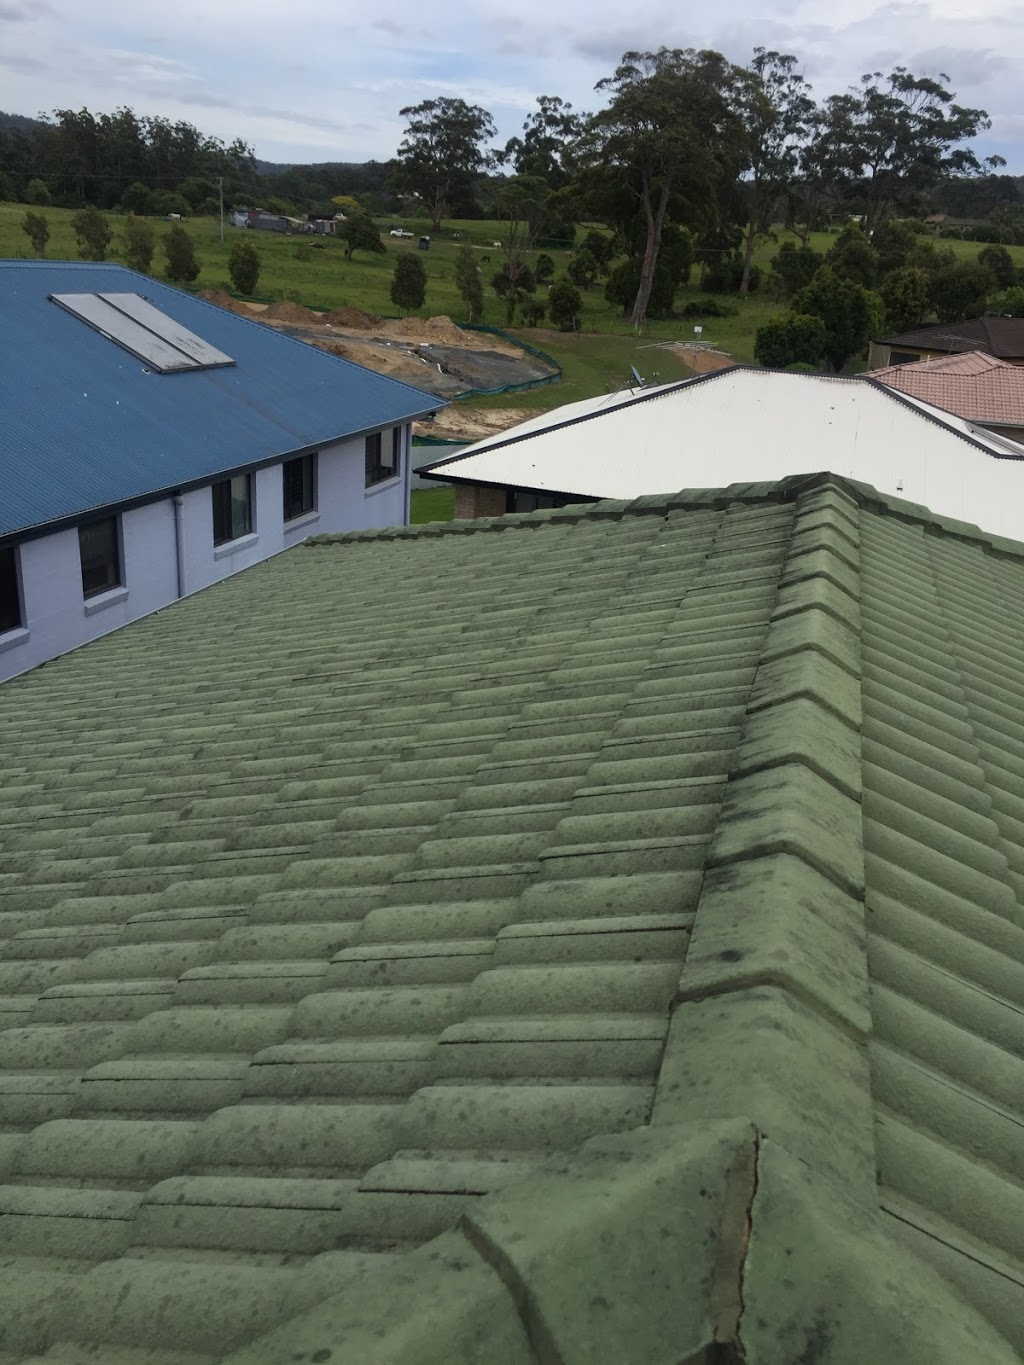 MID NORTH COAST PRESSURE CLEANING ROOF AND DRIVEWAY RESTORATIONS | Lord St, East Kempsey NSW 2440, Australia | Phone: 0413 643 206